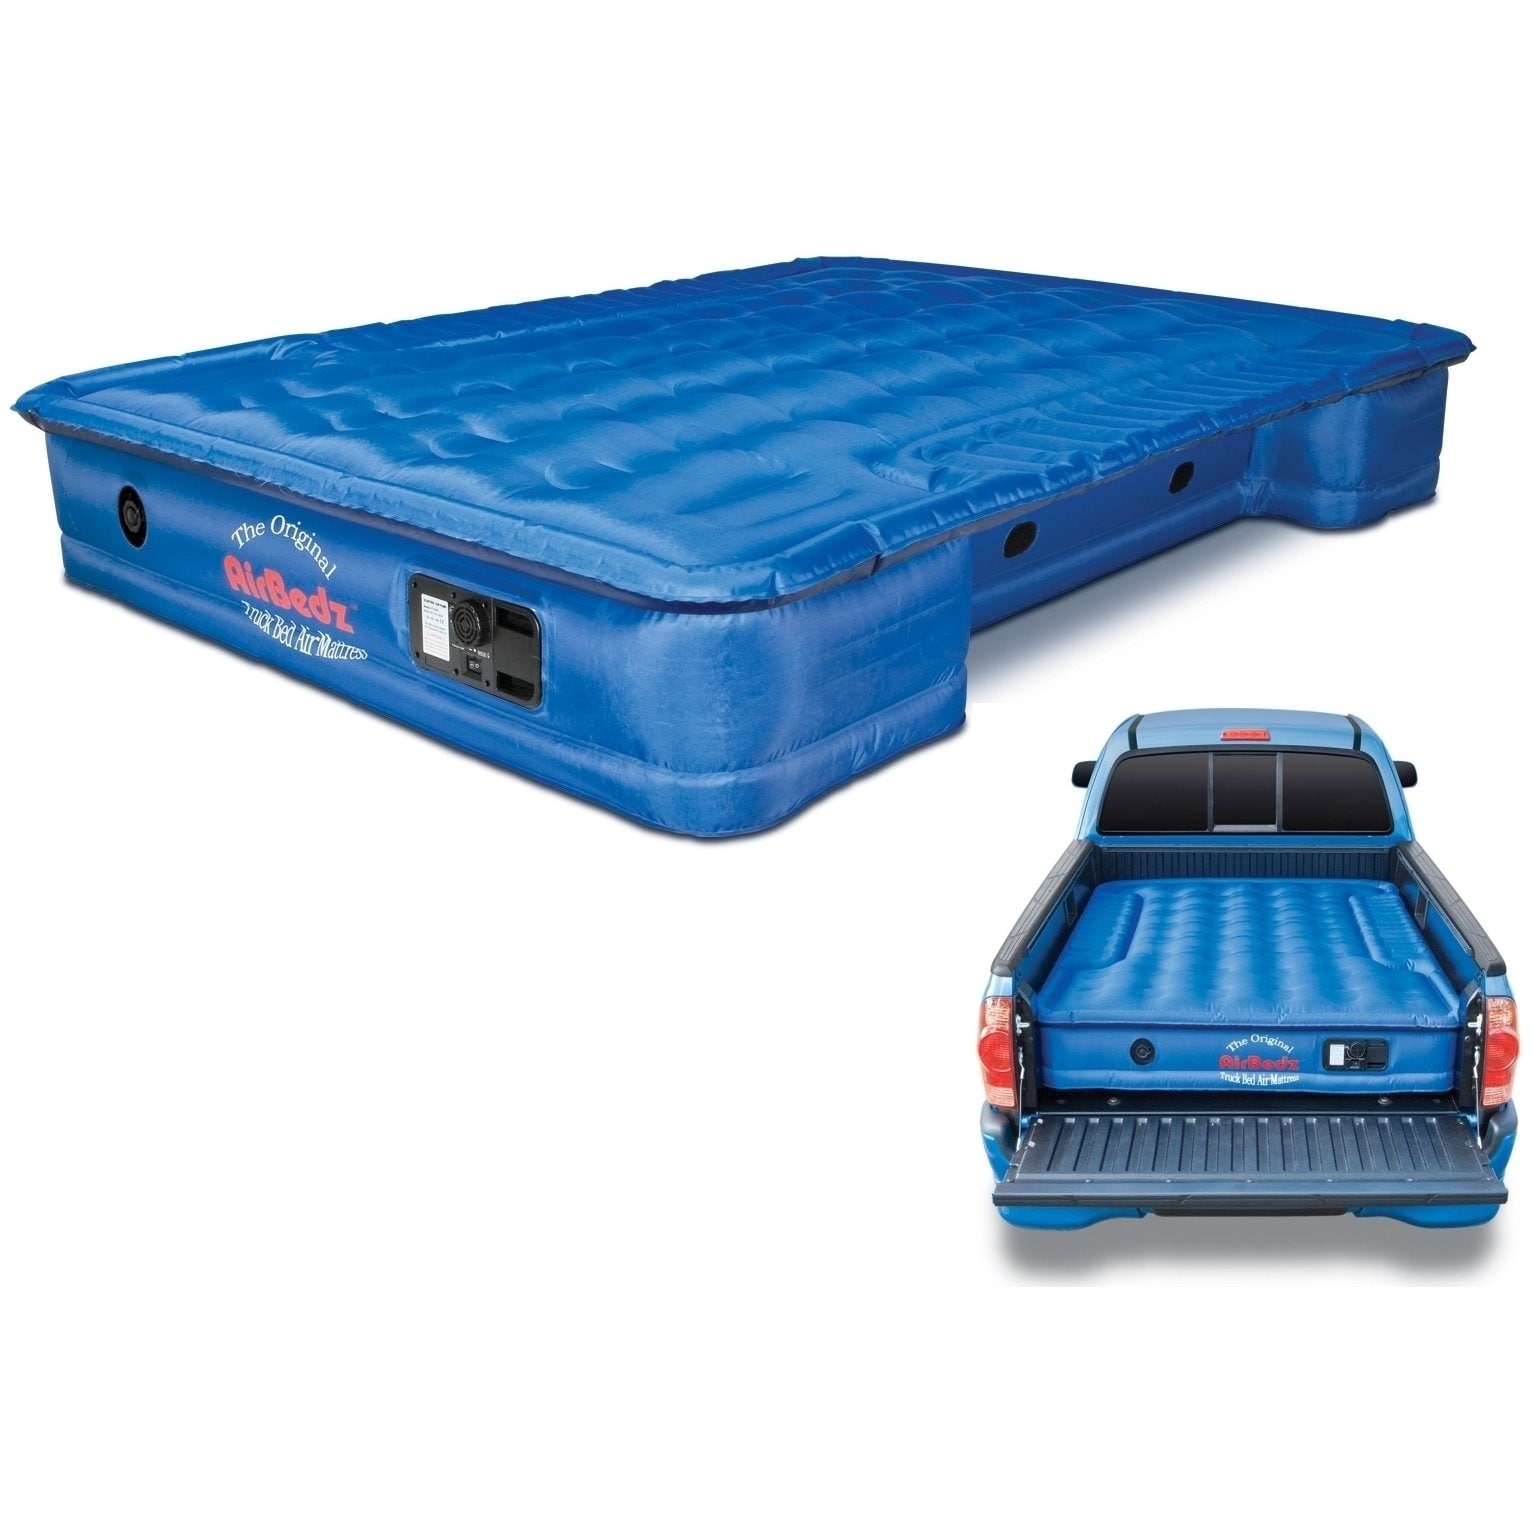 AirBedz Full size Truck Bed Air Mattress with Build in Pump